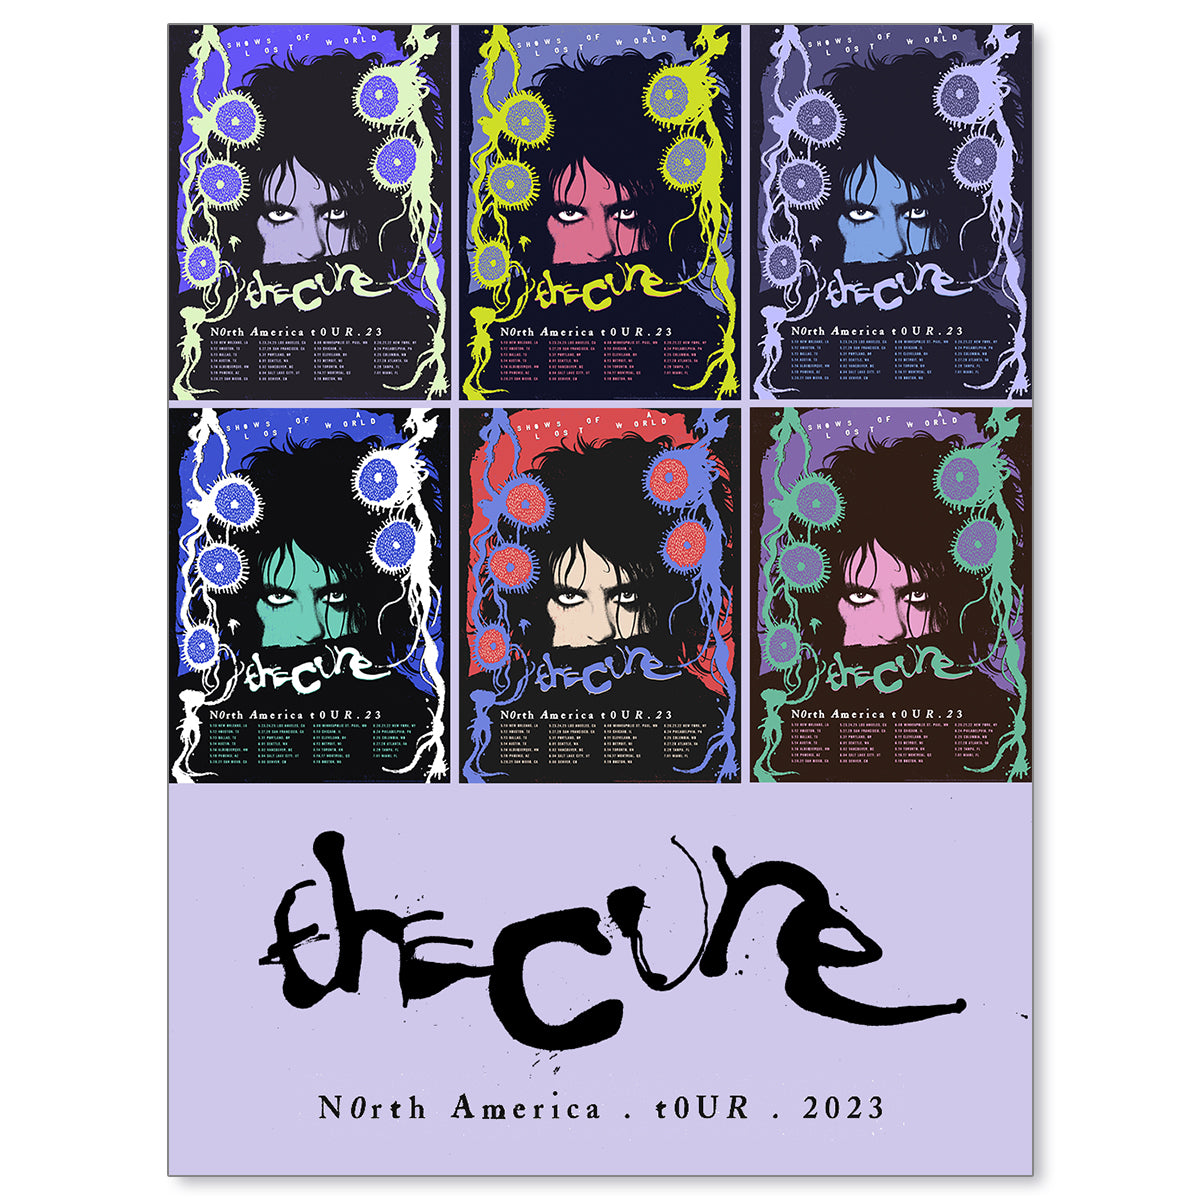 The Cure Shows of a Lost World Tour 2023 Posters (Set of 6)